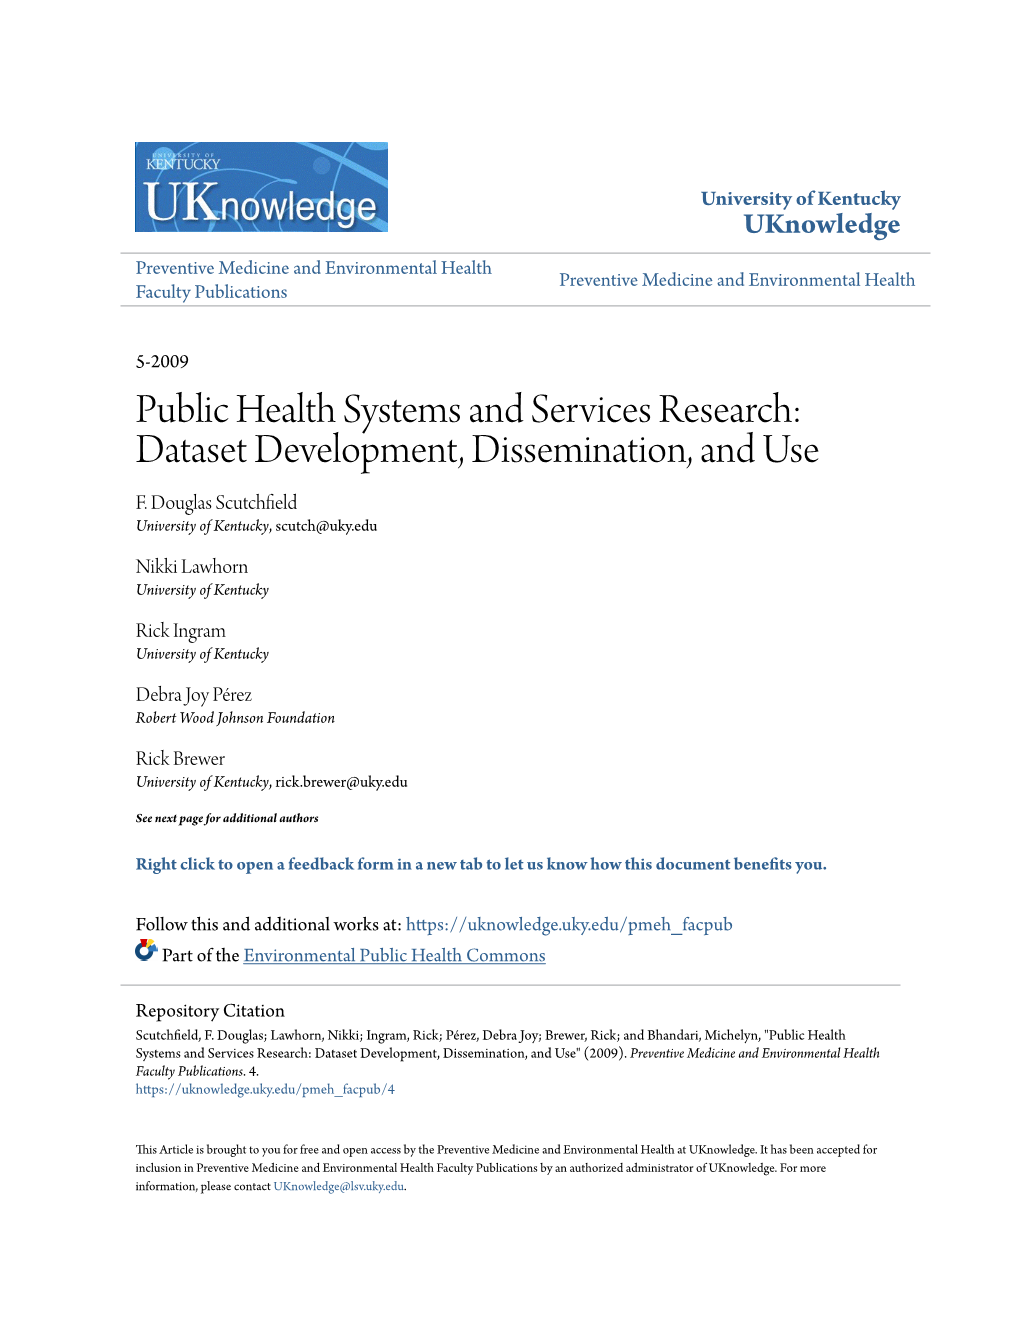 Public Health Systems and Services Research: Dataset Development, Dissemination, and Use F